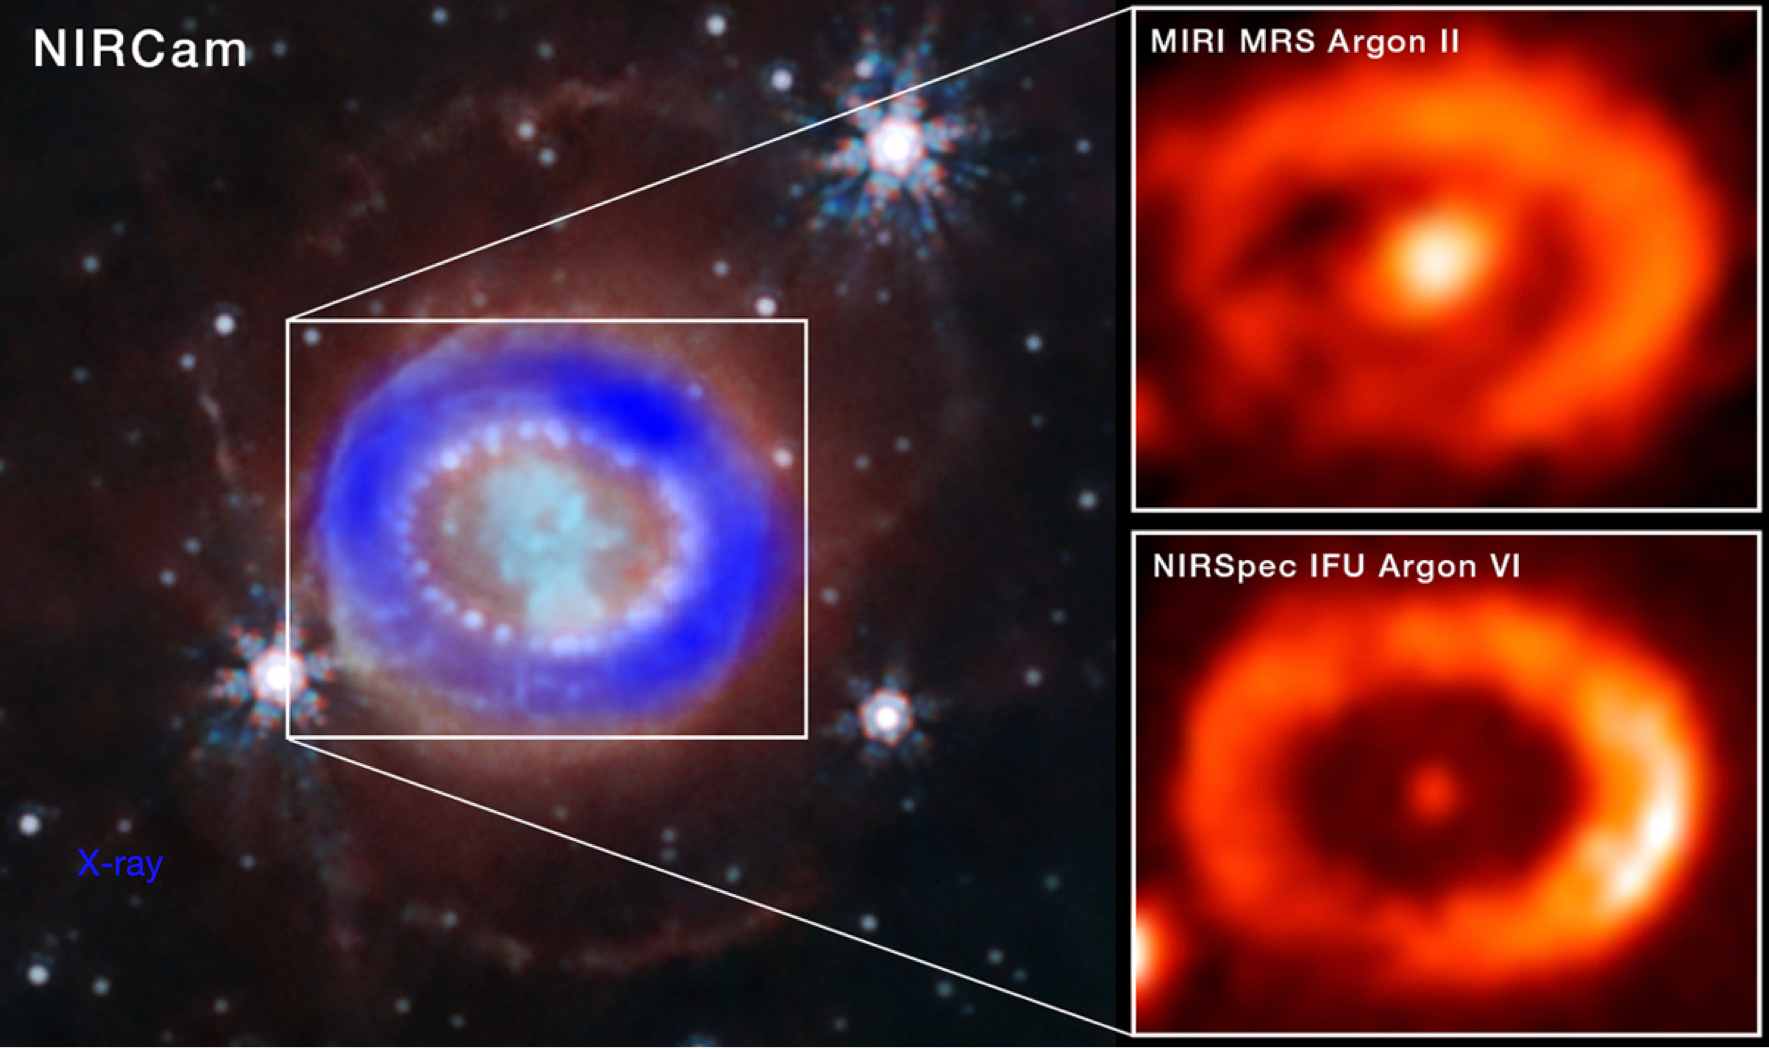 JWST and Chandra images of SN 1987a. The JWST image shows most direct evidence yet for the creation of a neutron star